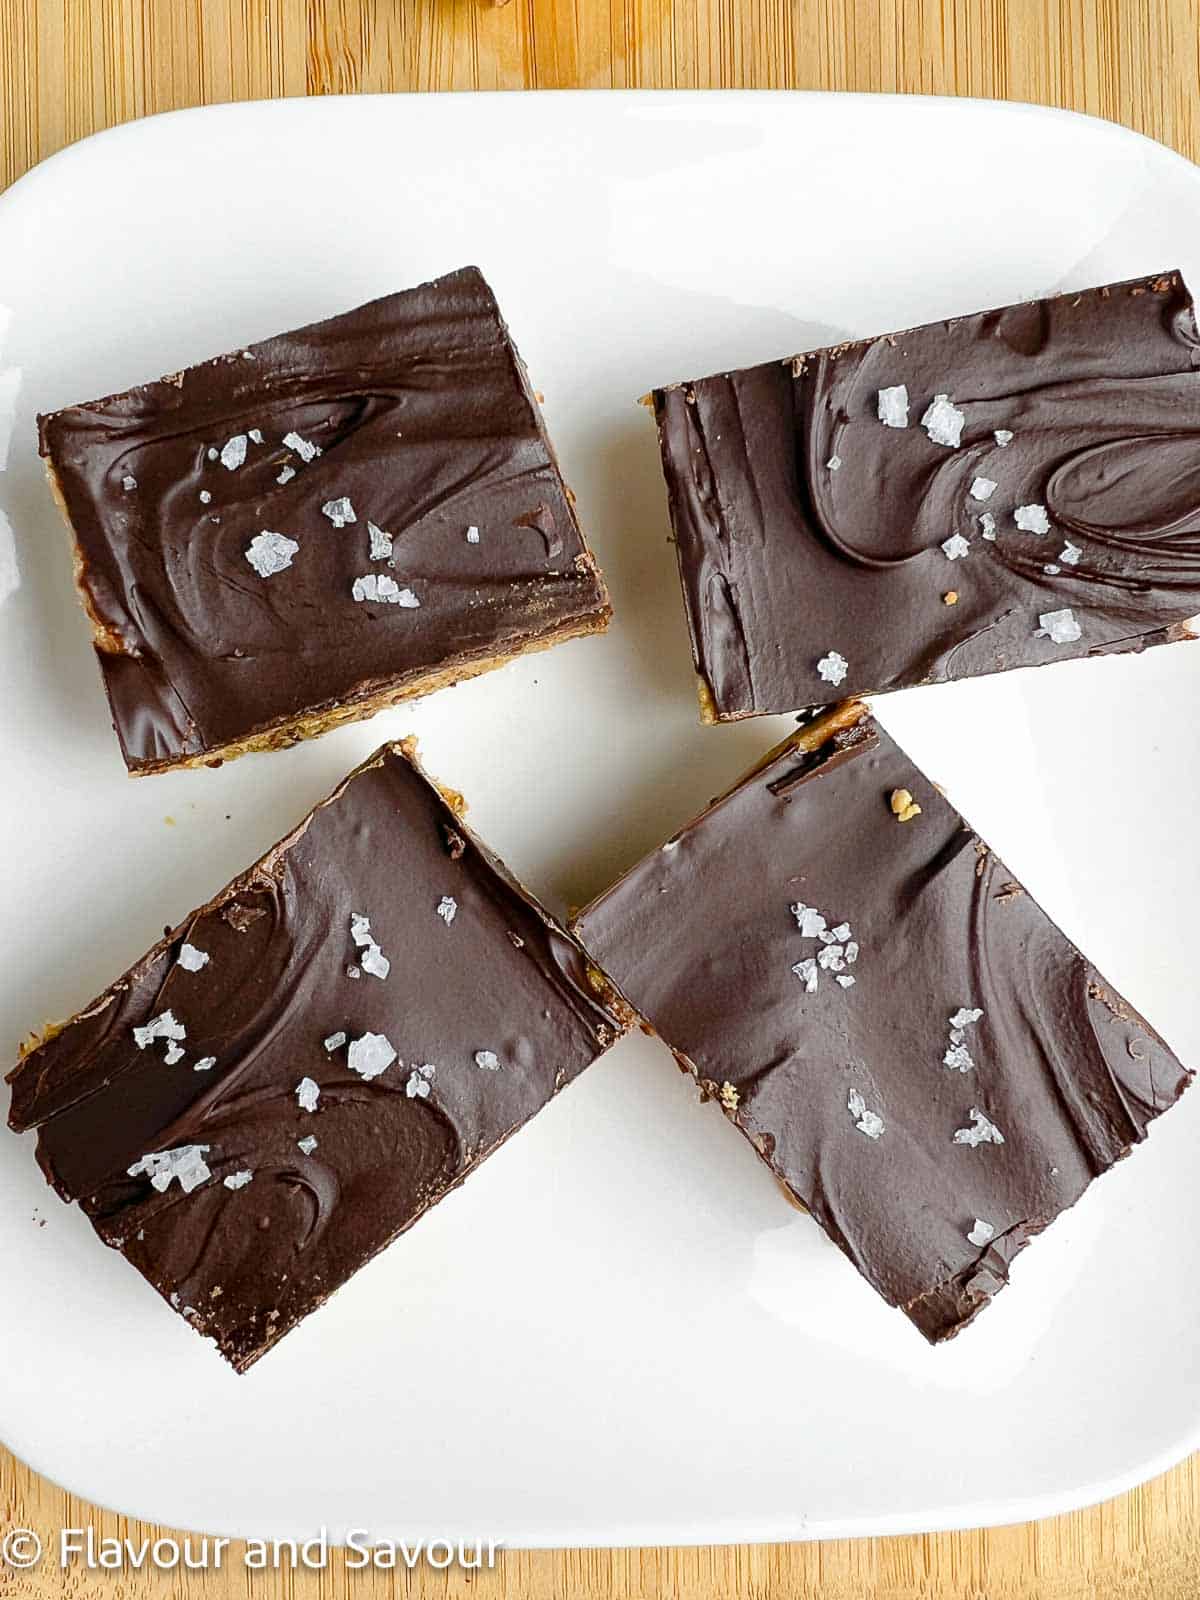 Peanut butter collagen bars topped with chocolate and flaky sea salt.